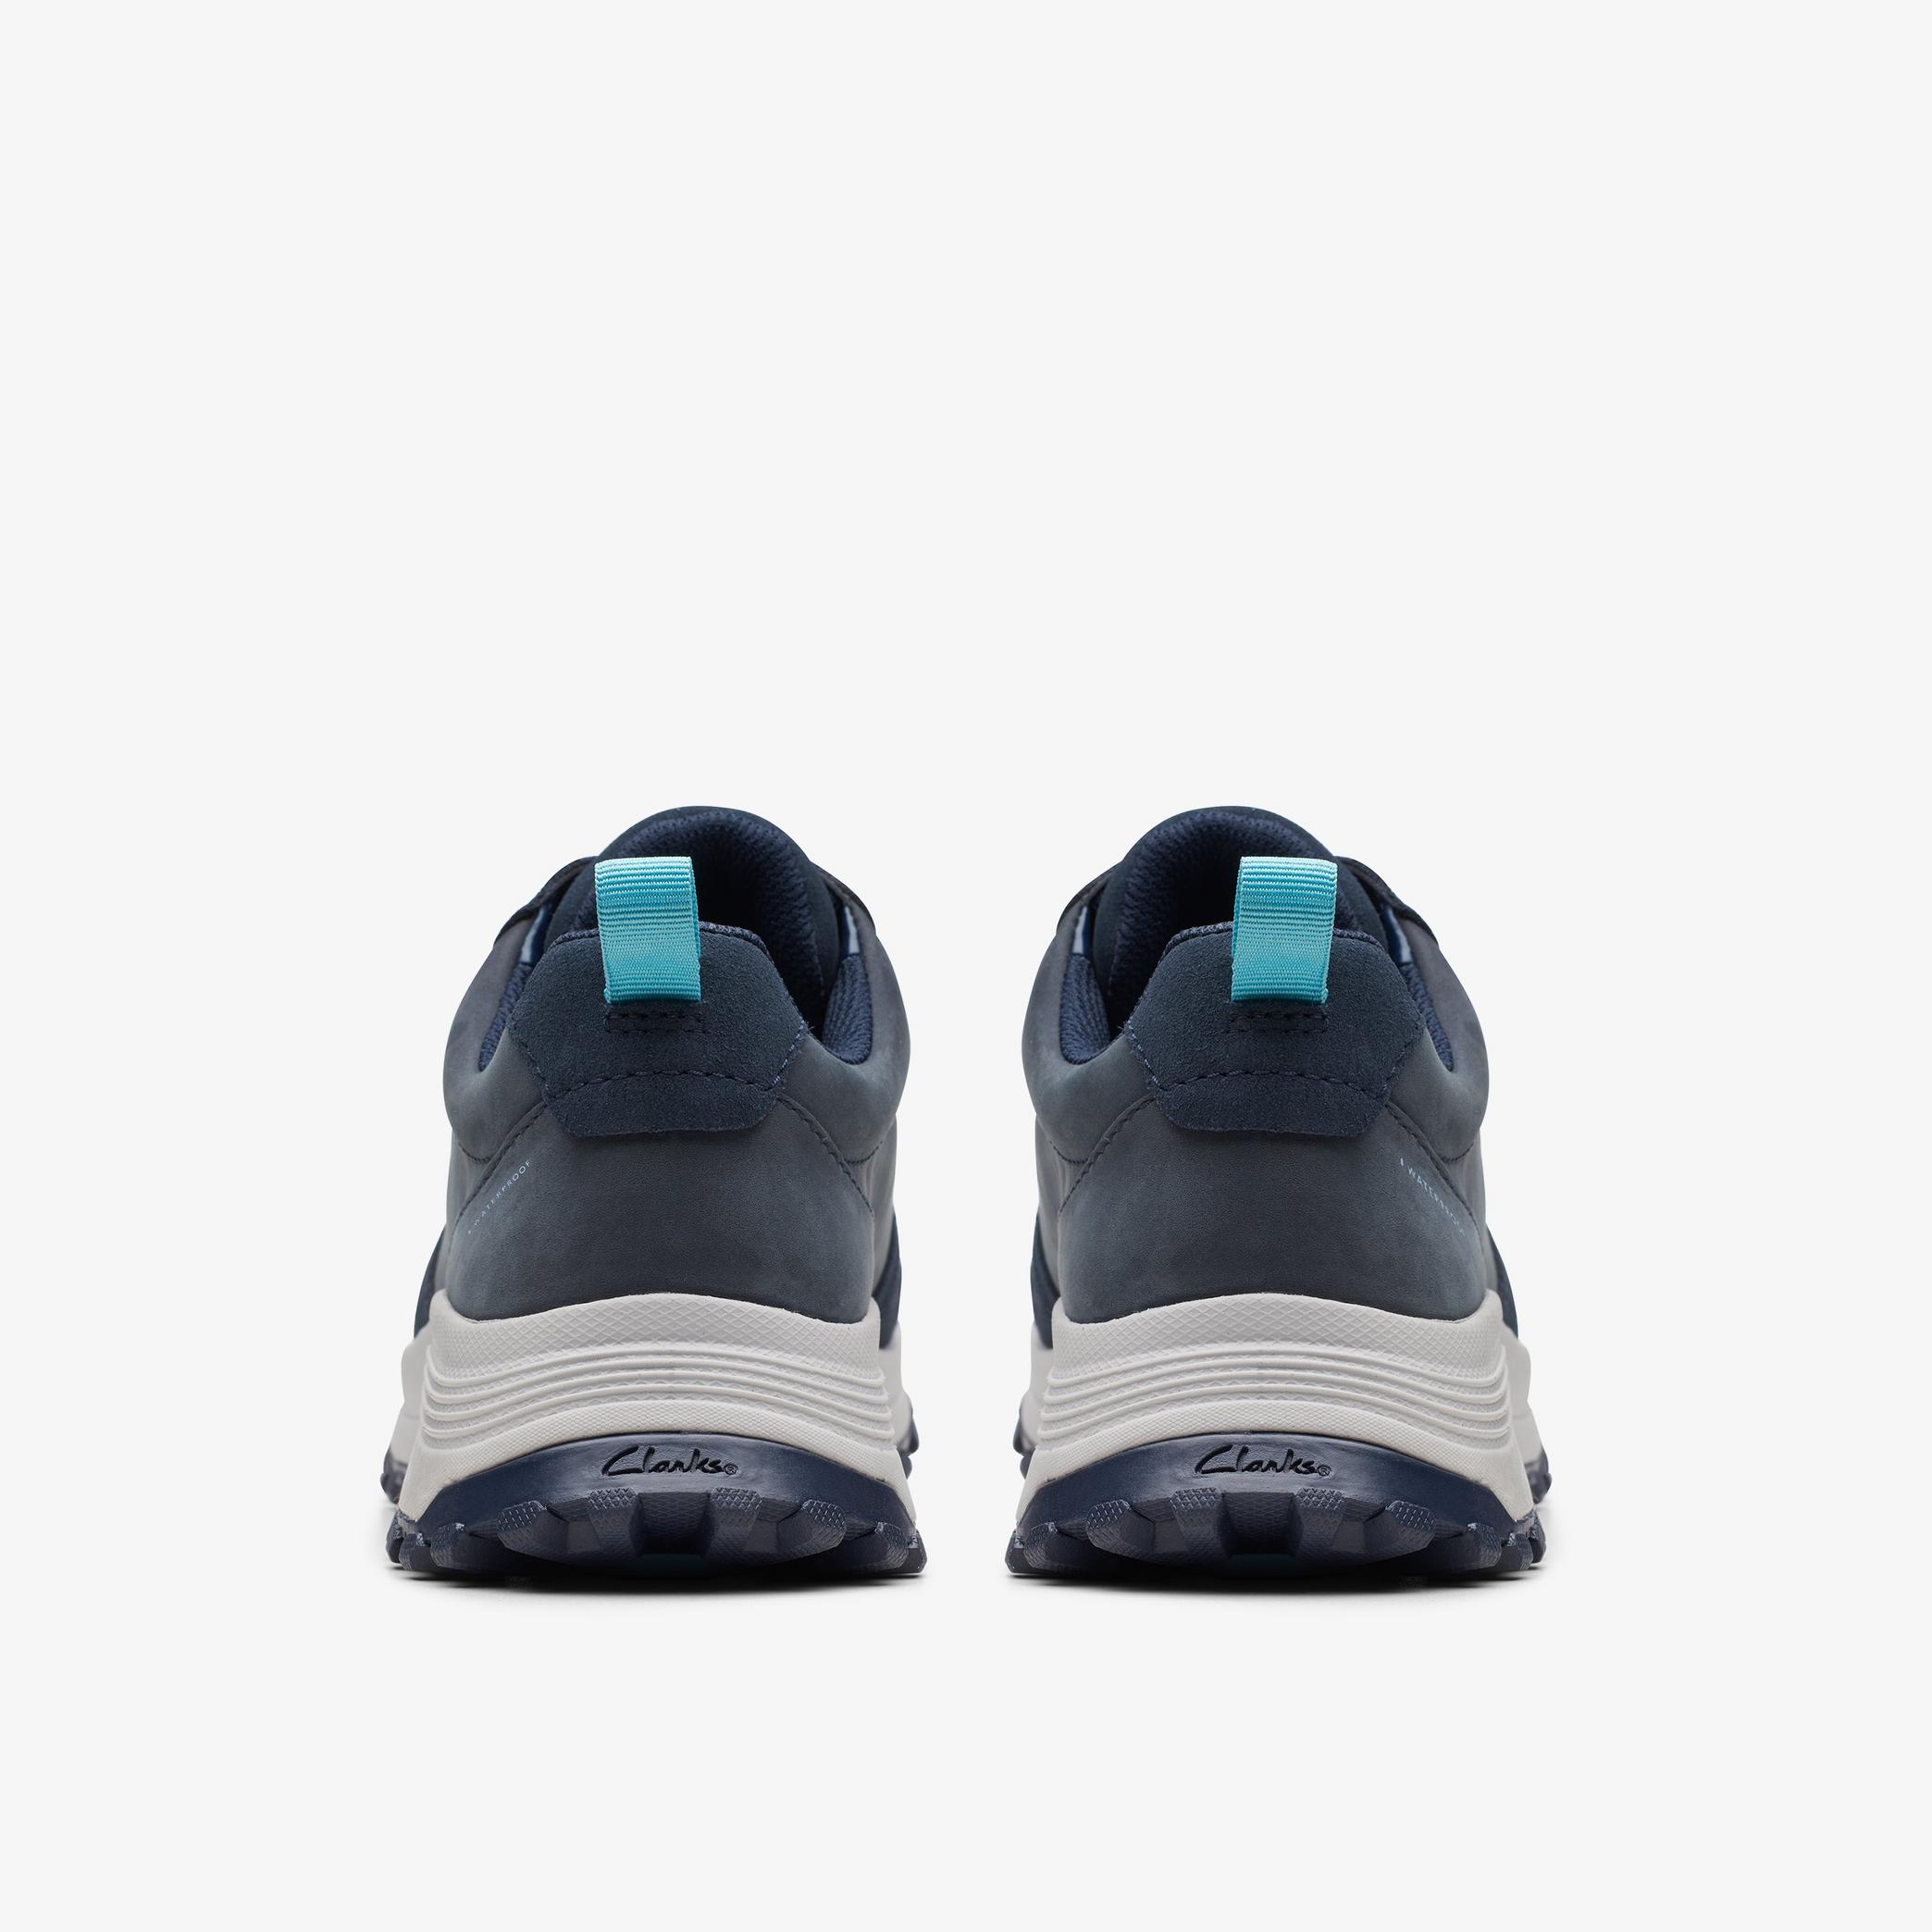 WOMENS ATL Trek Free WP Navy Nubuck Trainers | Clarks Outlet